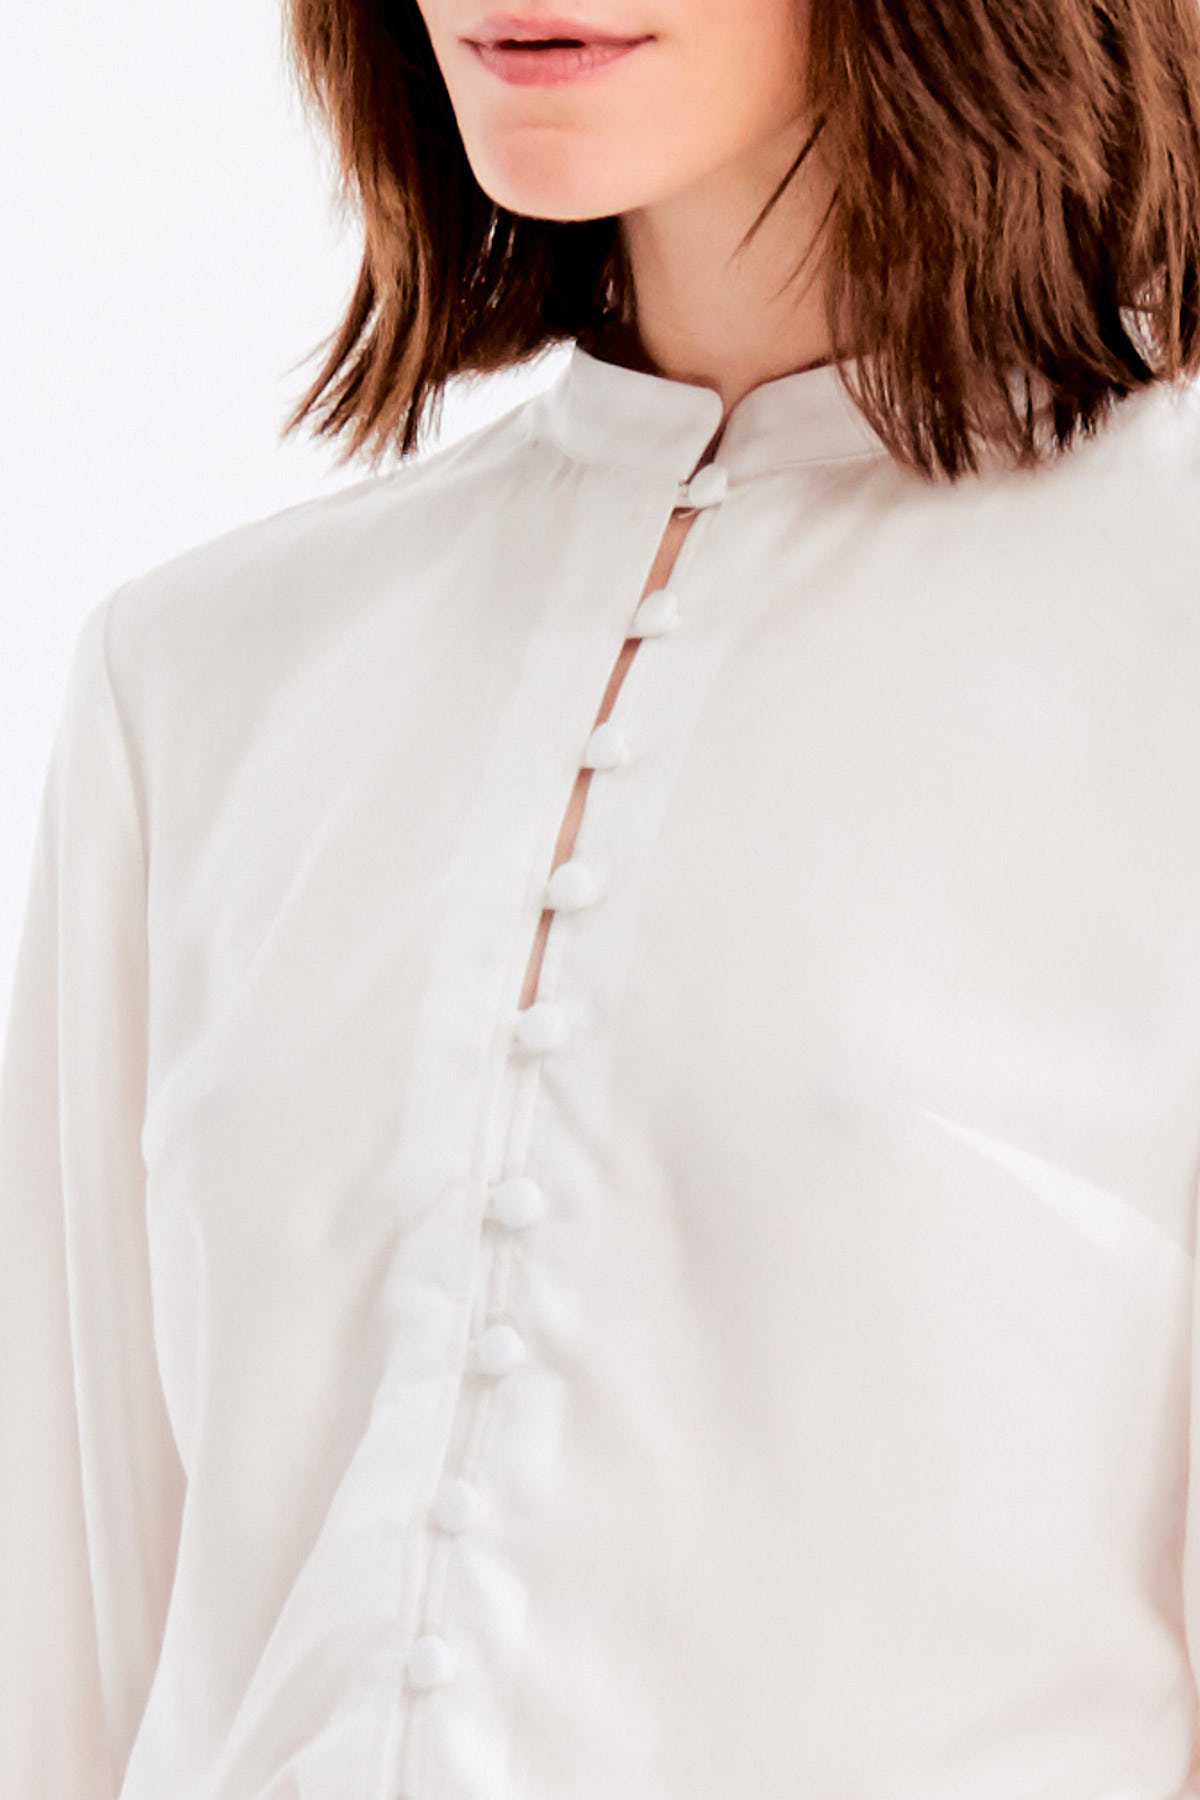 Milky shirt with buttons, photo 7